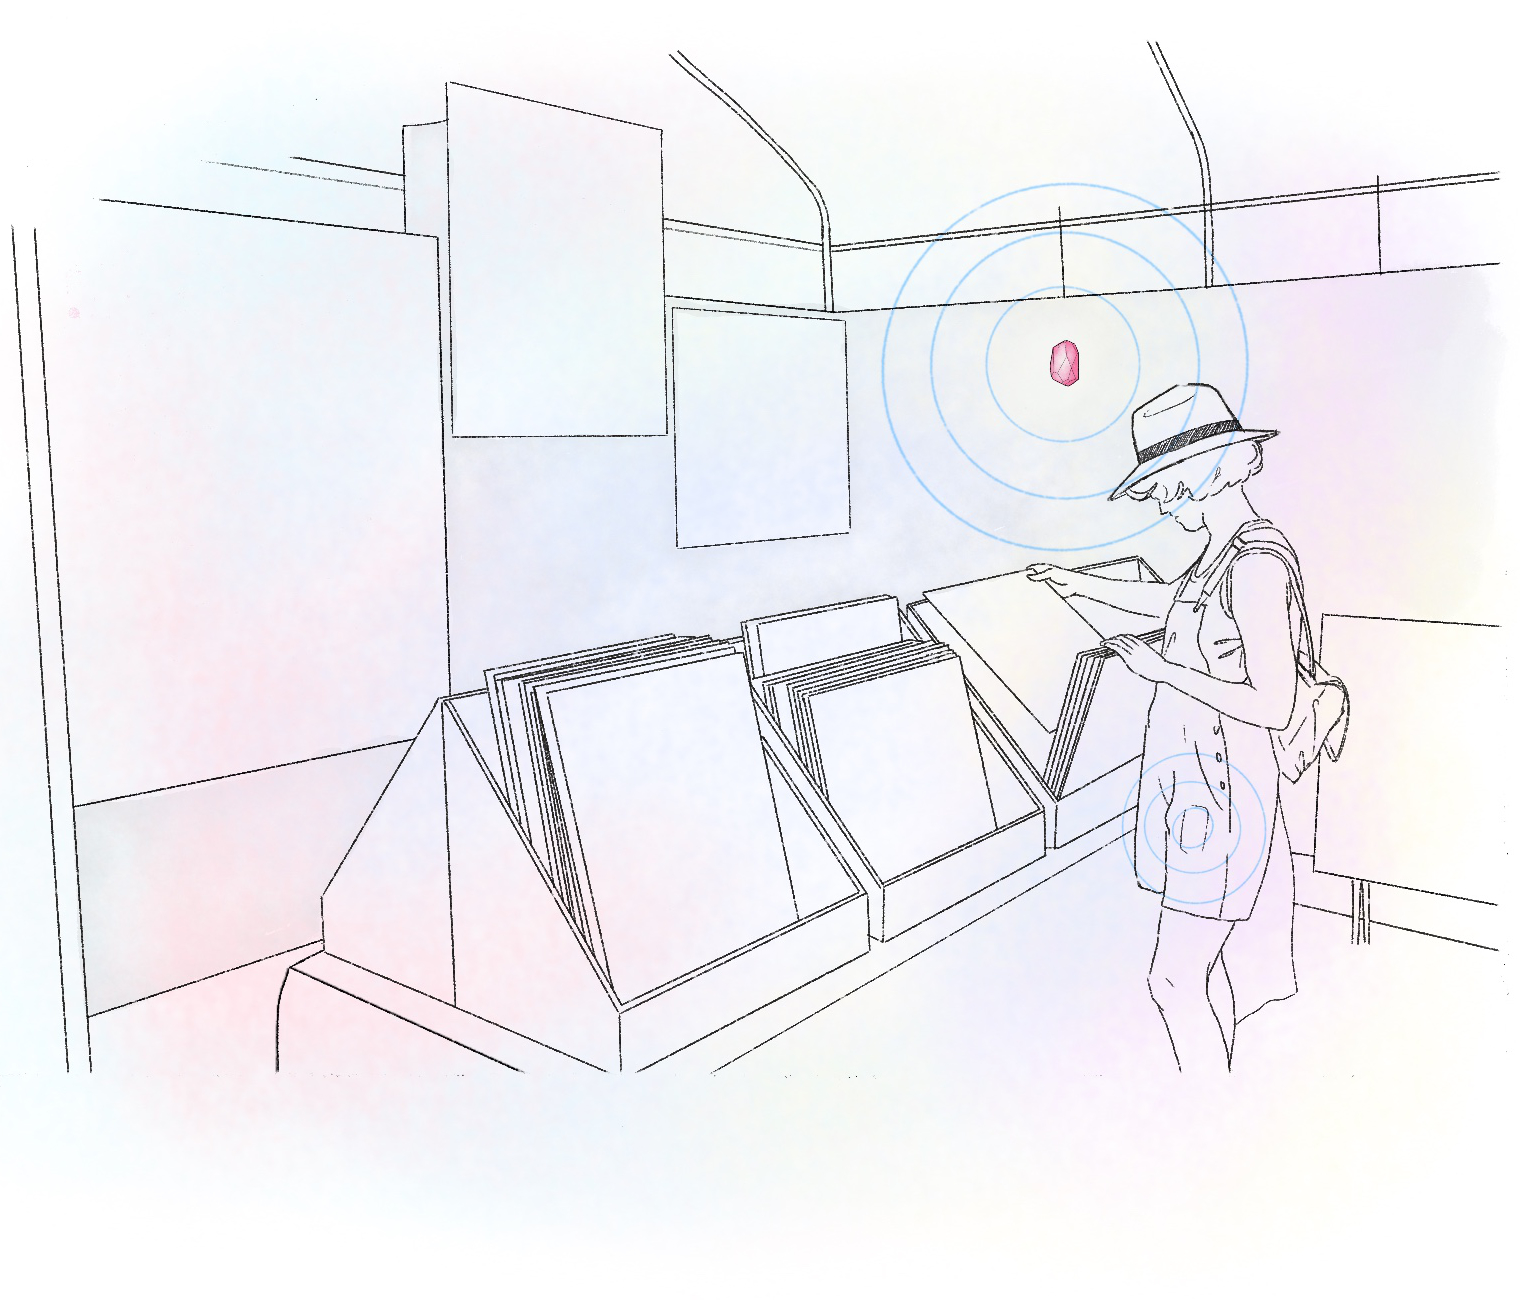 an illustration showing how Bluetooth beacons can unintrusively send a signal to a phone